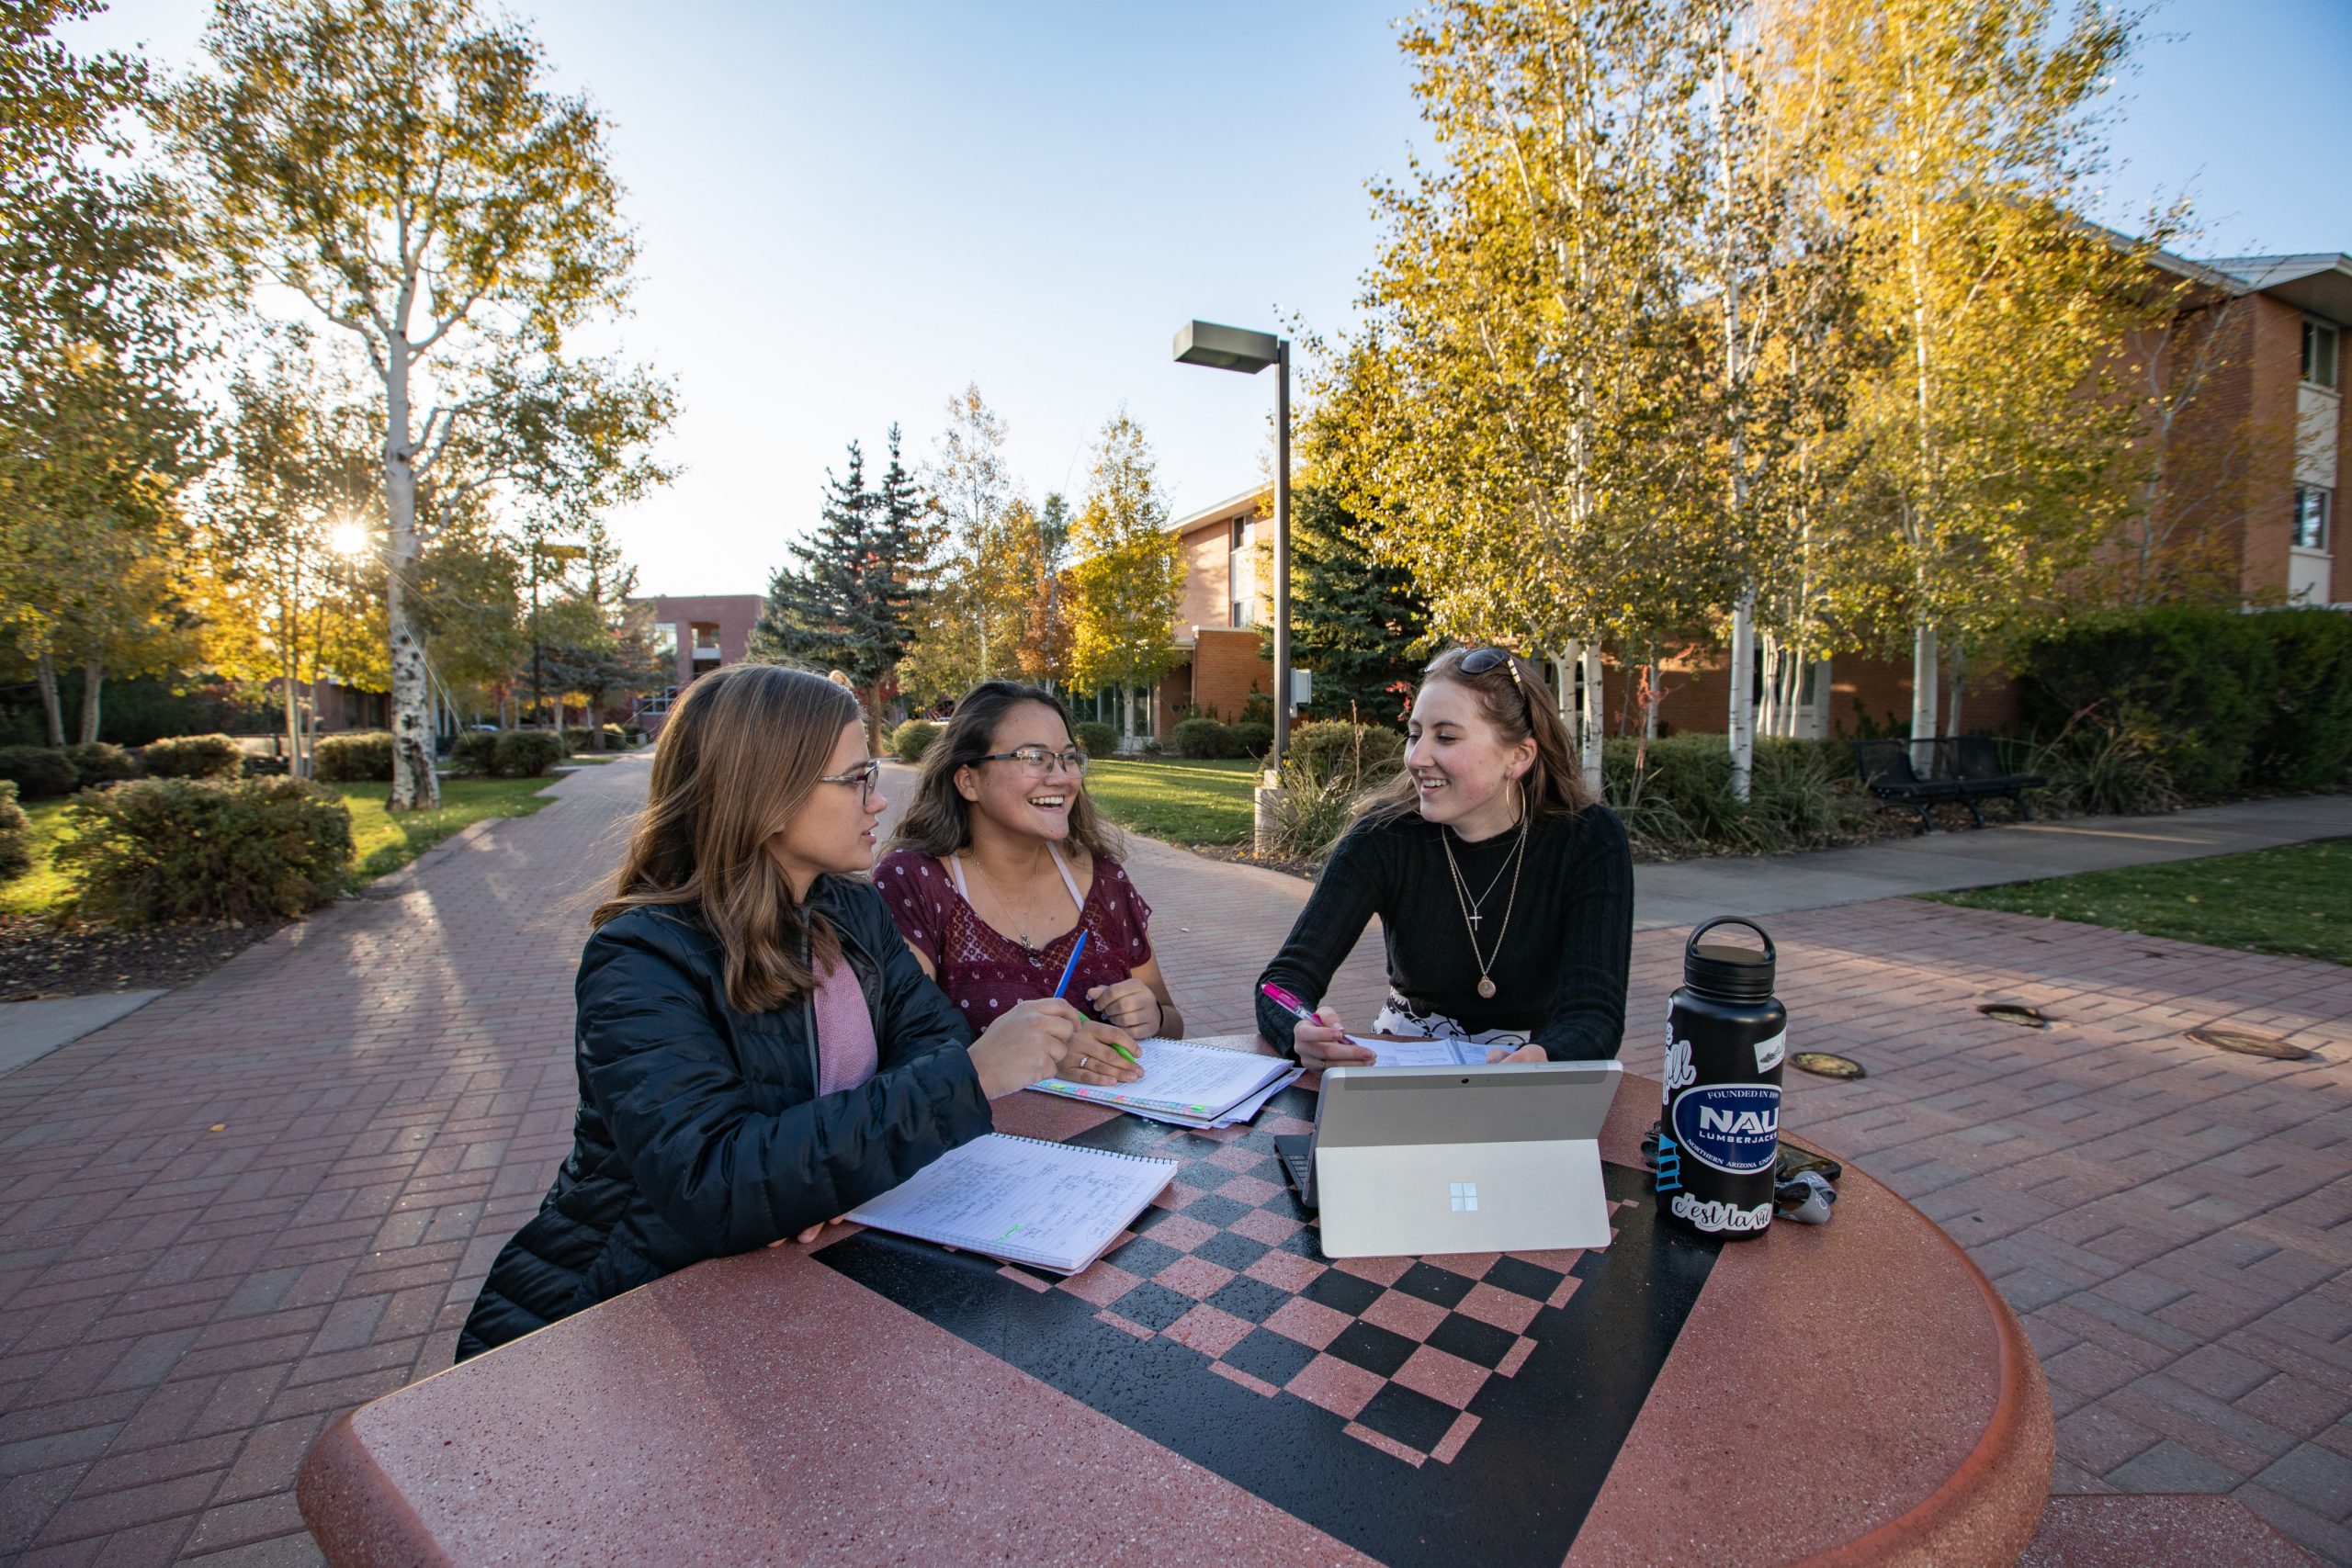 Students studying together outside at checkerboard table.